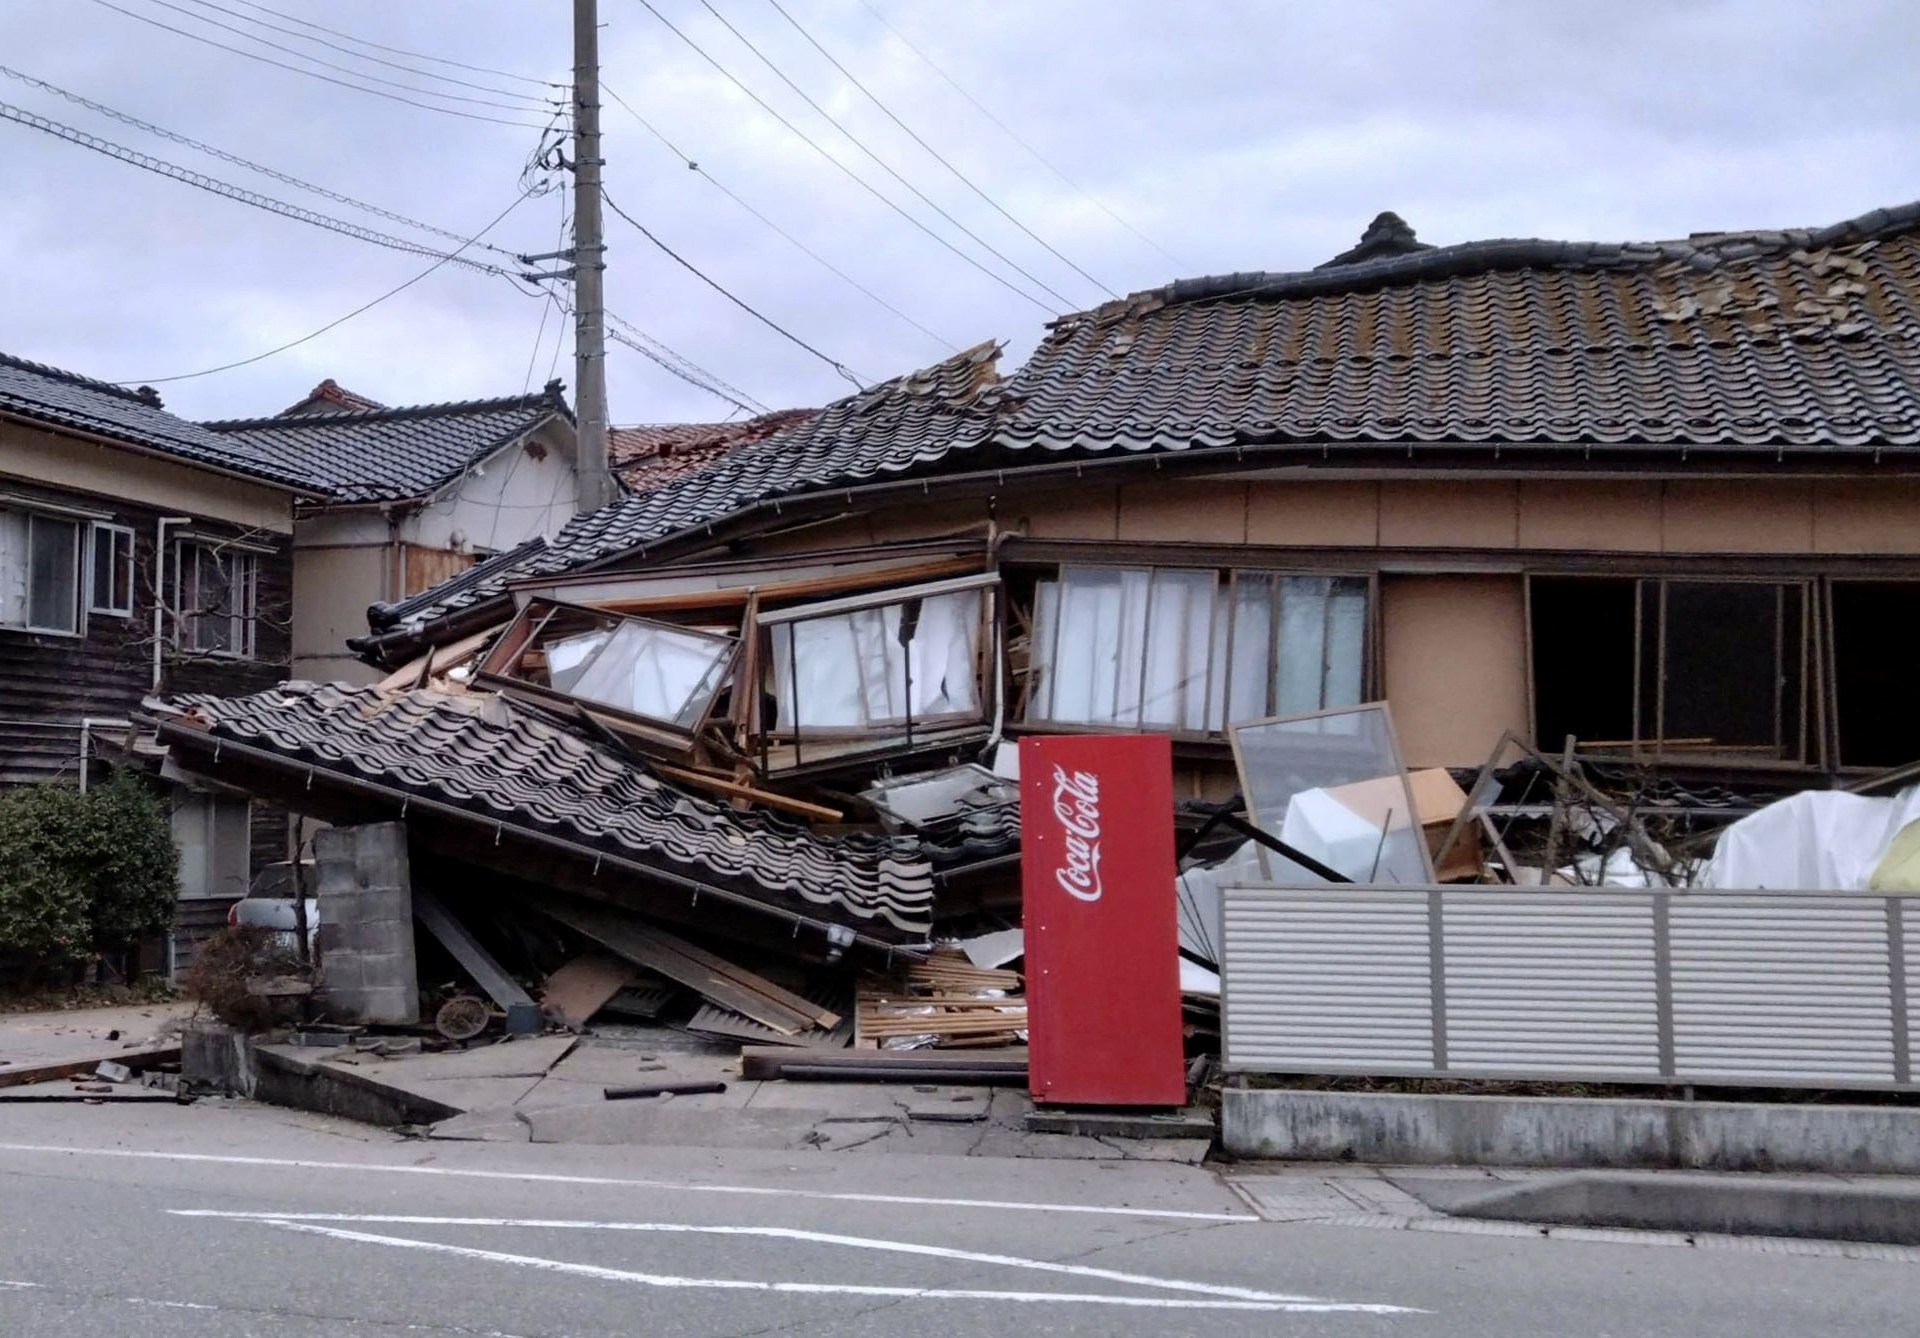 First scenes as Japan hit by tsunami waves after strong earthquakes | Earthquakes News